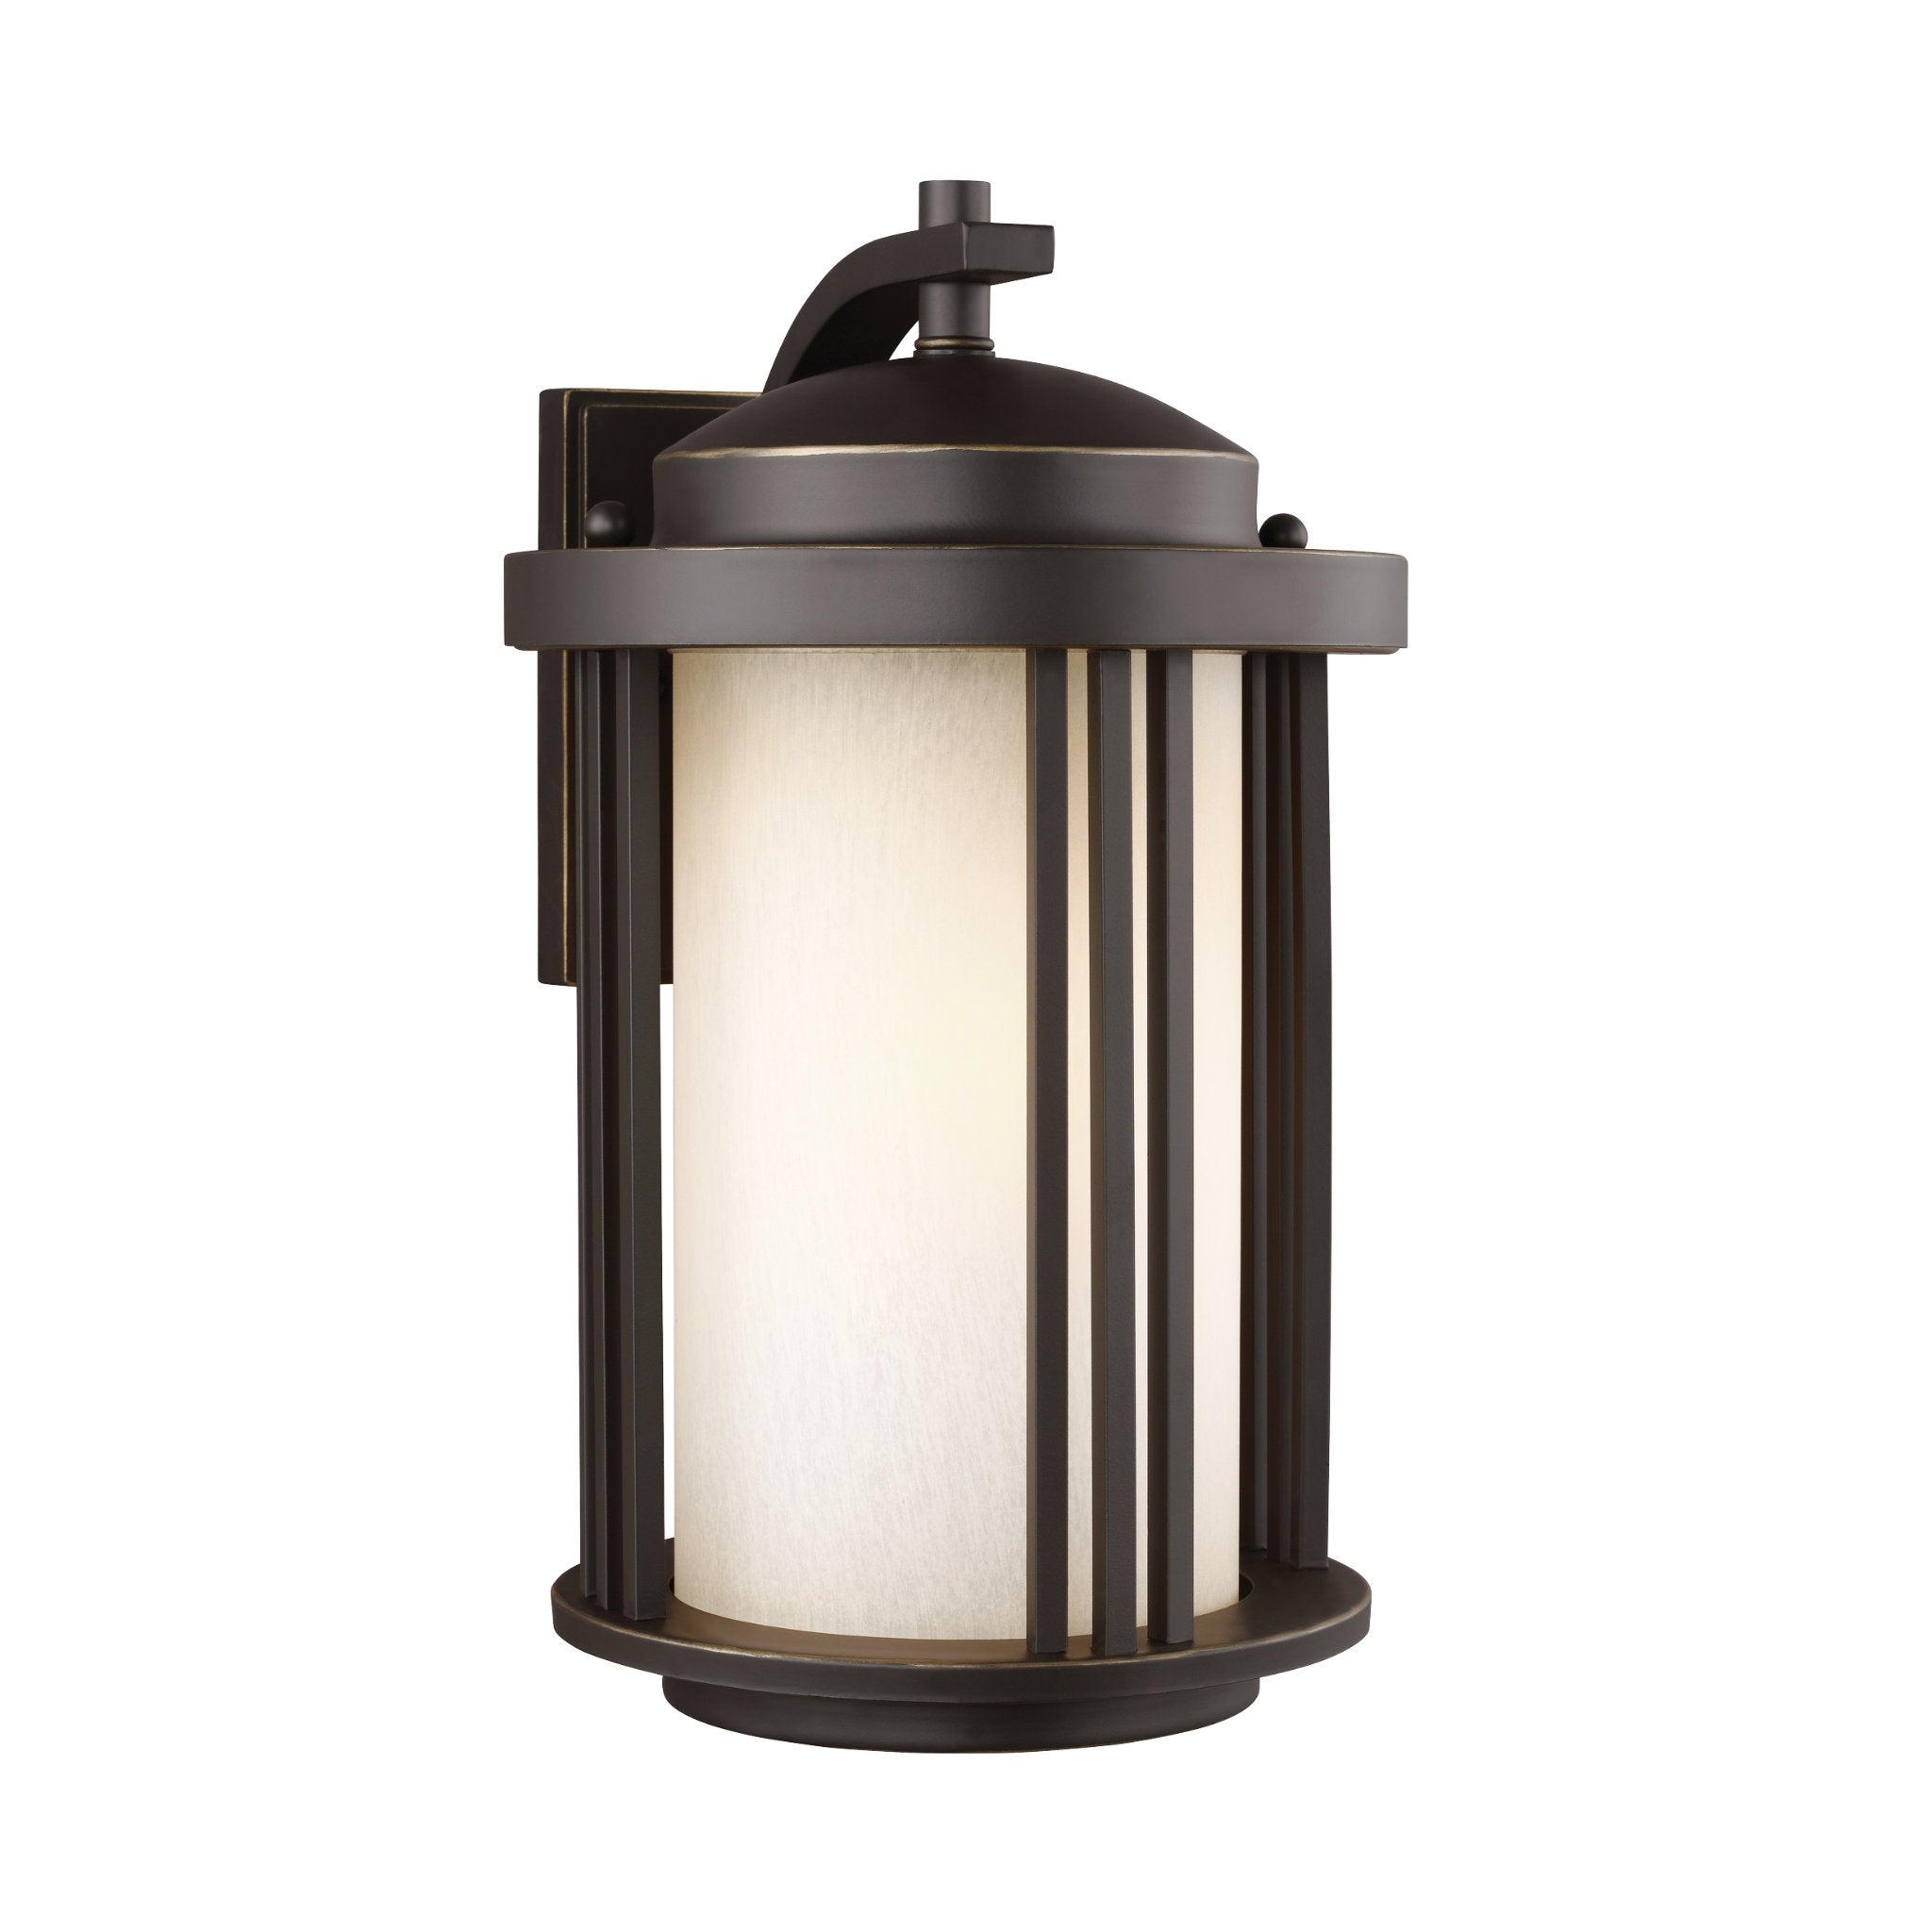 Crowell Medium One Light Outdoor Wall Lantern Contemporary Fixture 9" Width 14.875" Height Aluminum Round Creme Parchment Shade in Antique Bronze